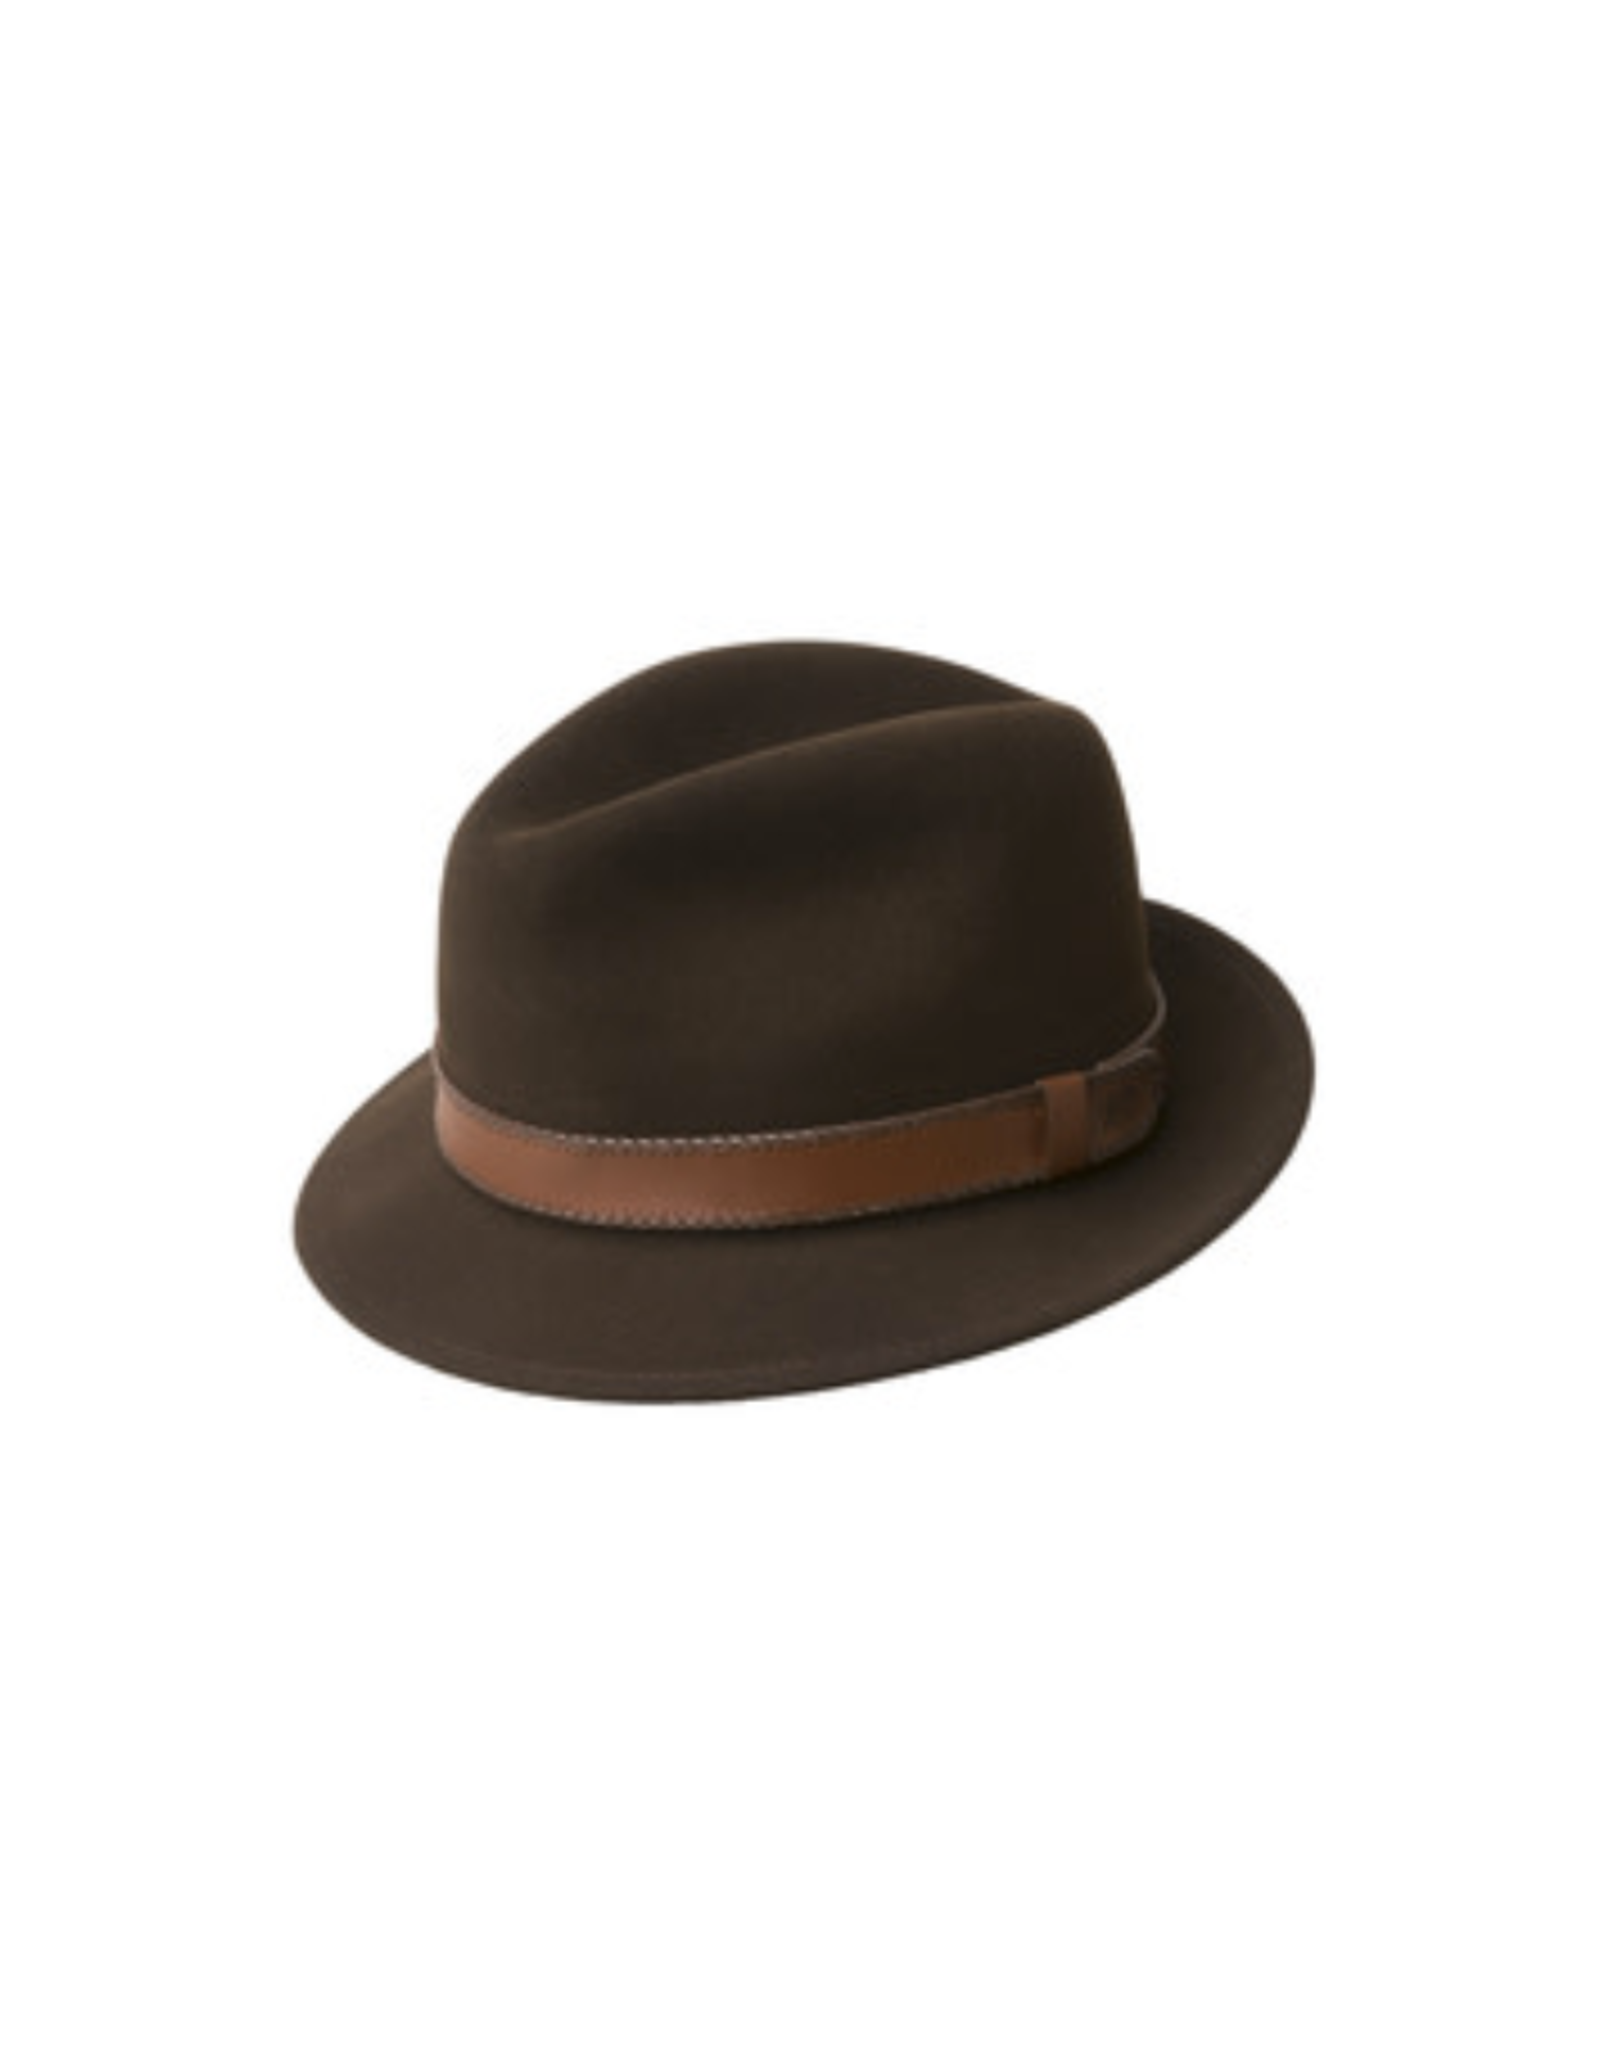 Bailey 1922 HAT-FEDORA-PERRY